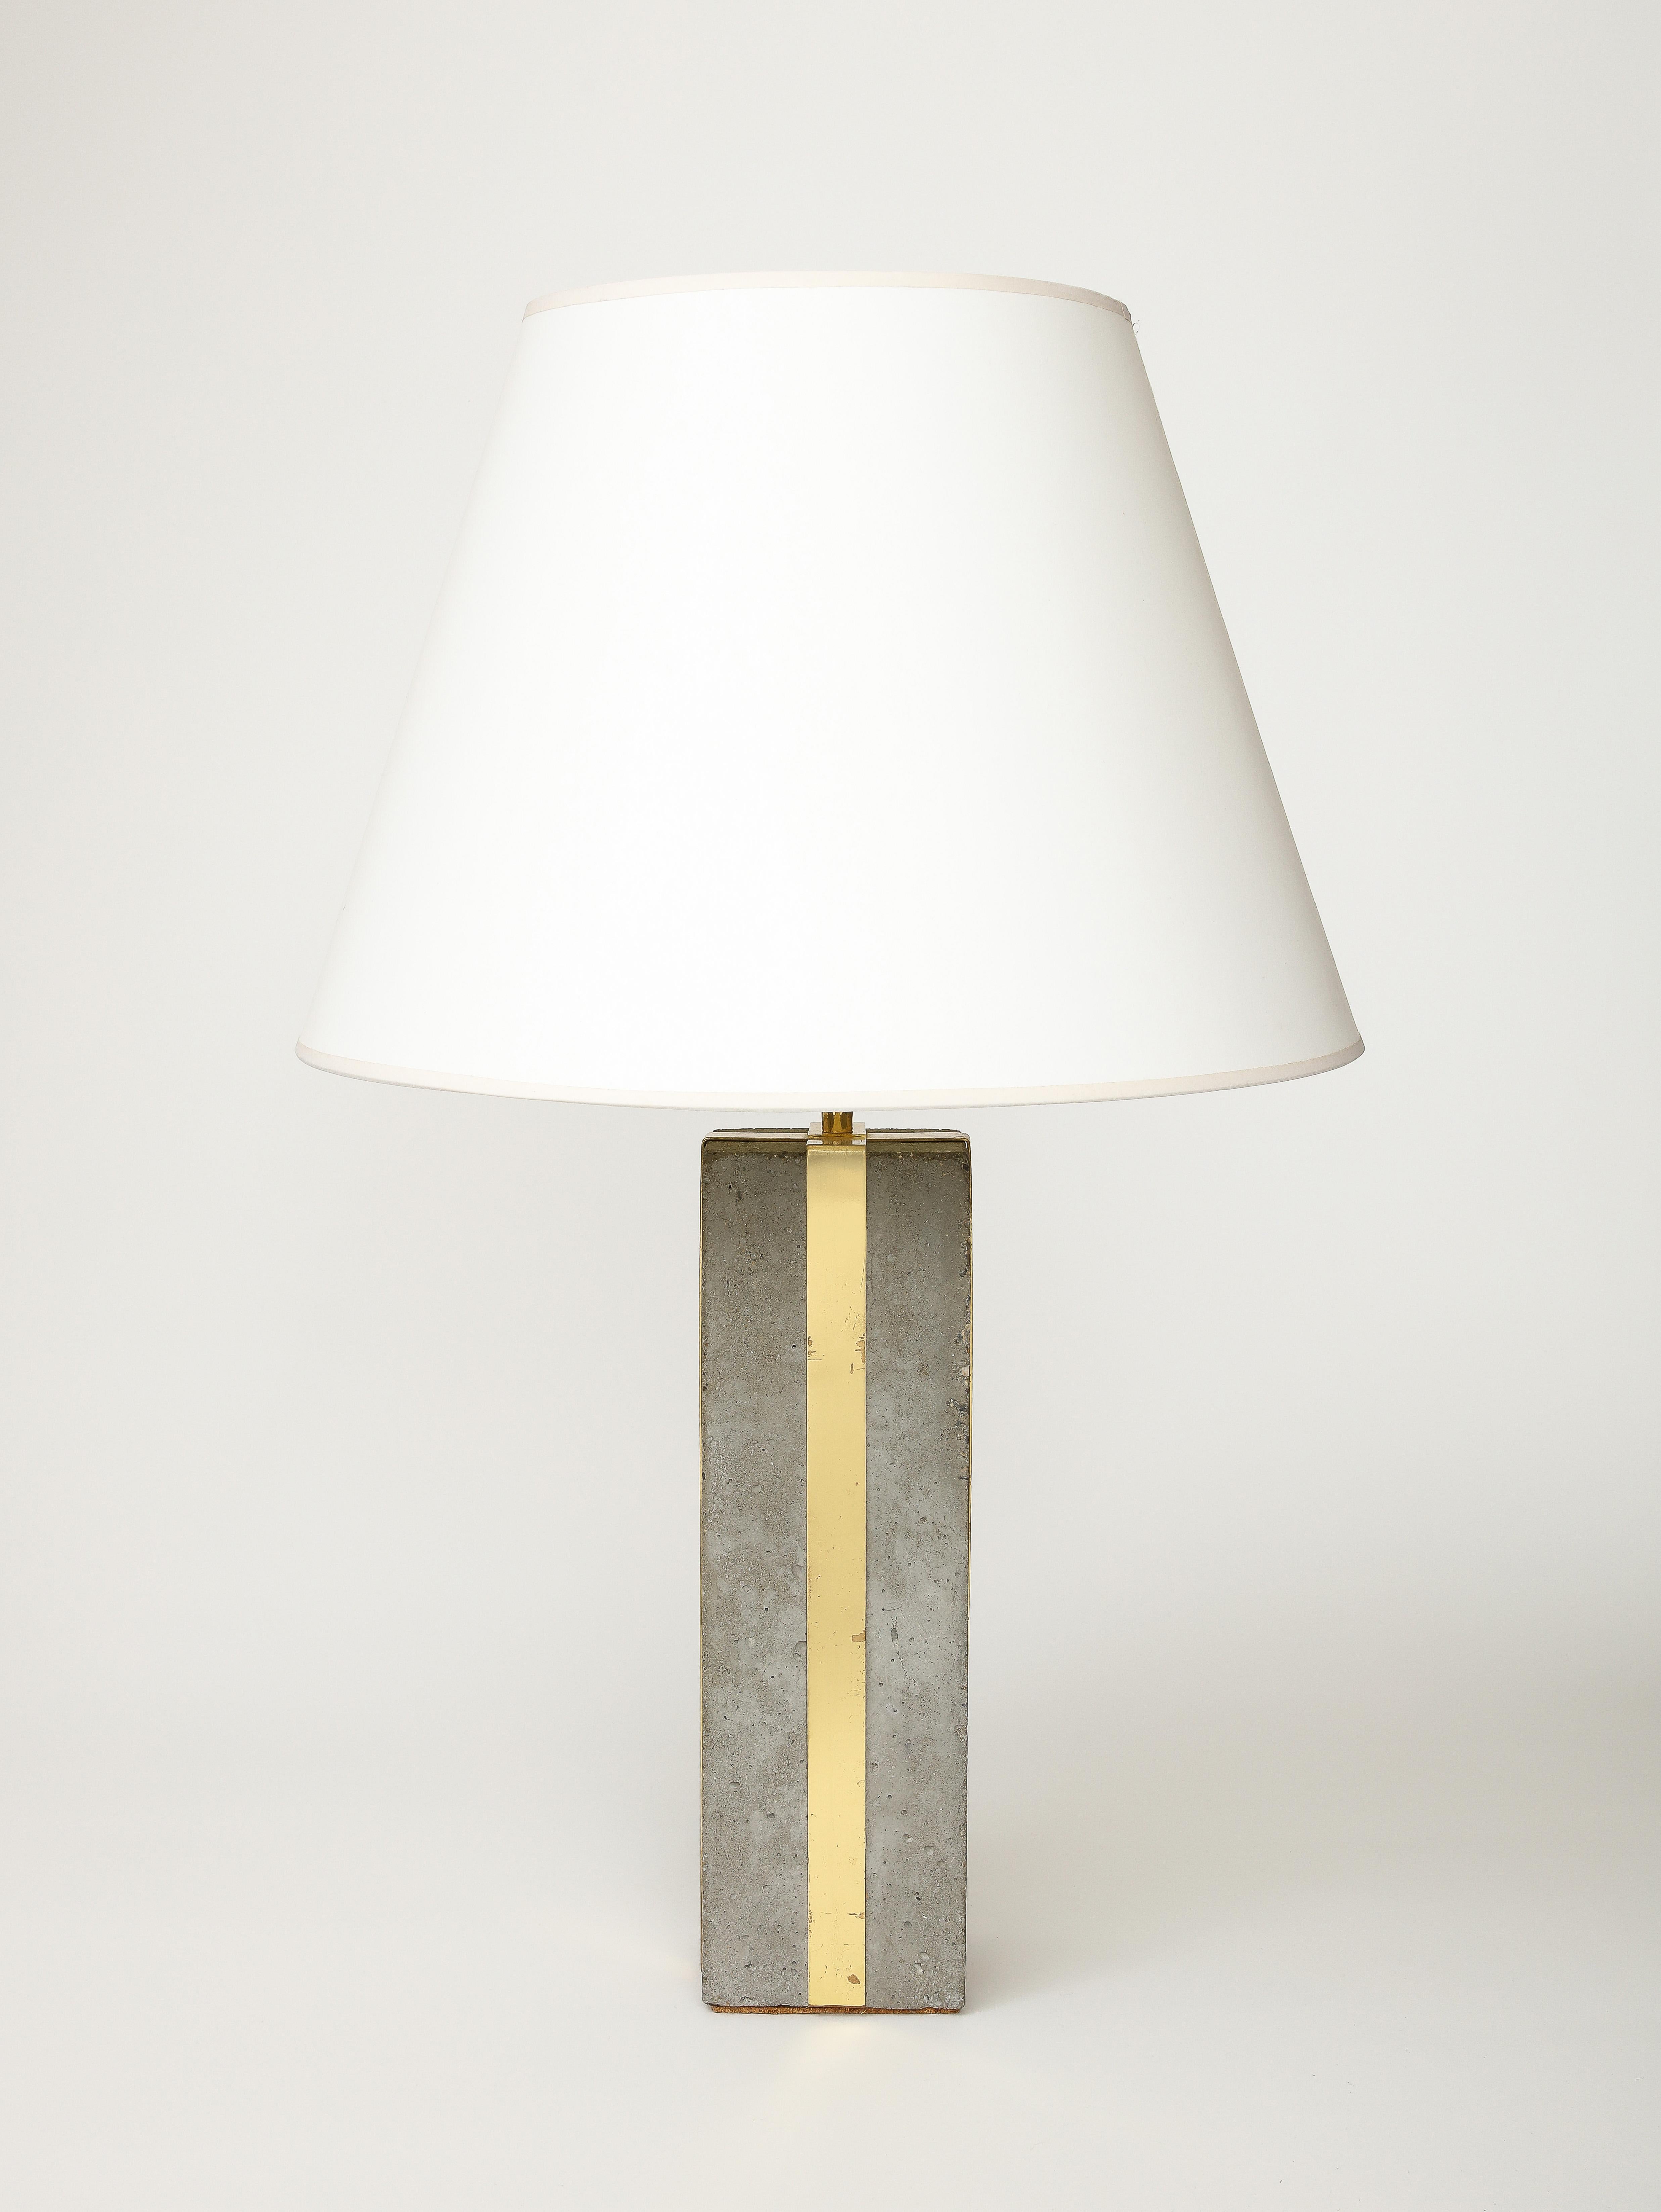 Strong, heavy table lamp by an unknown designer. The brass shines and contrasts beautifully with the raw concrete.

This table lamp was recently rewired with a black twisted silk cord, and bronze hardware.

Overall Height: 28